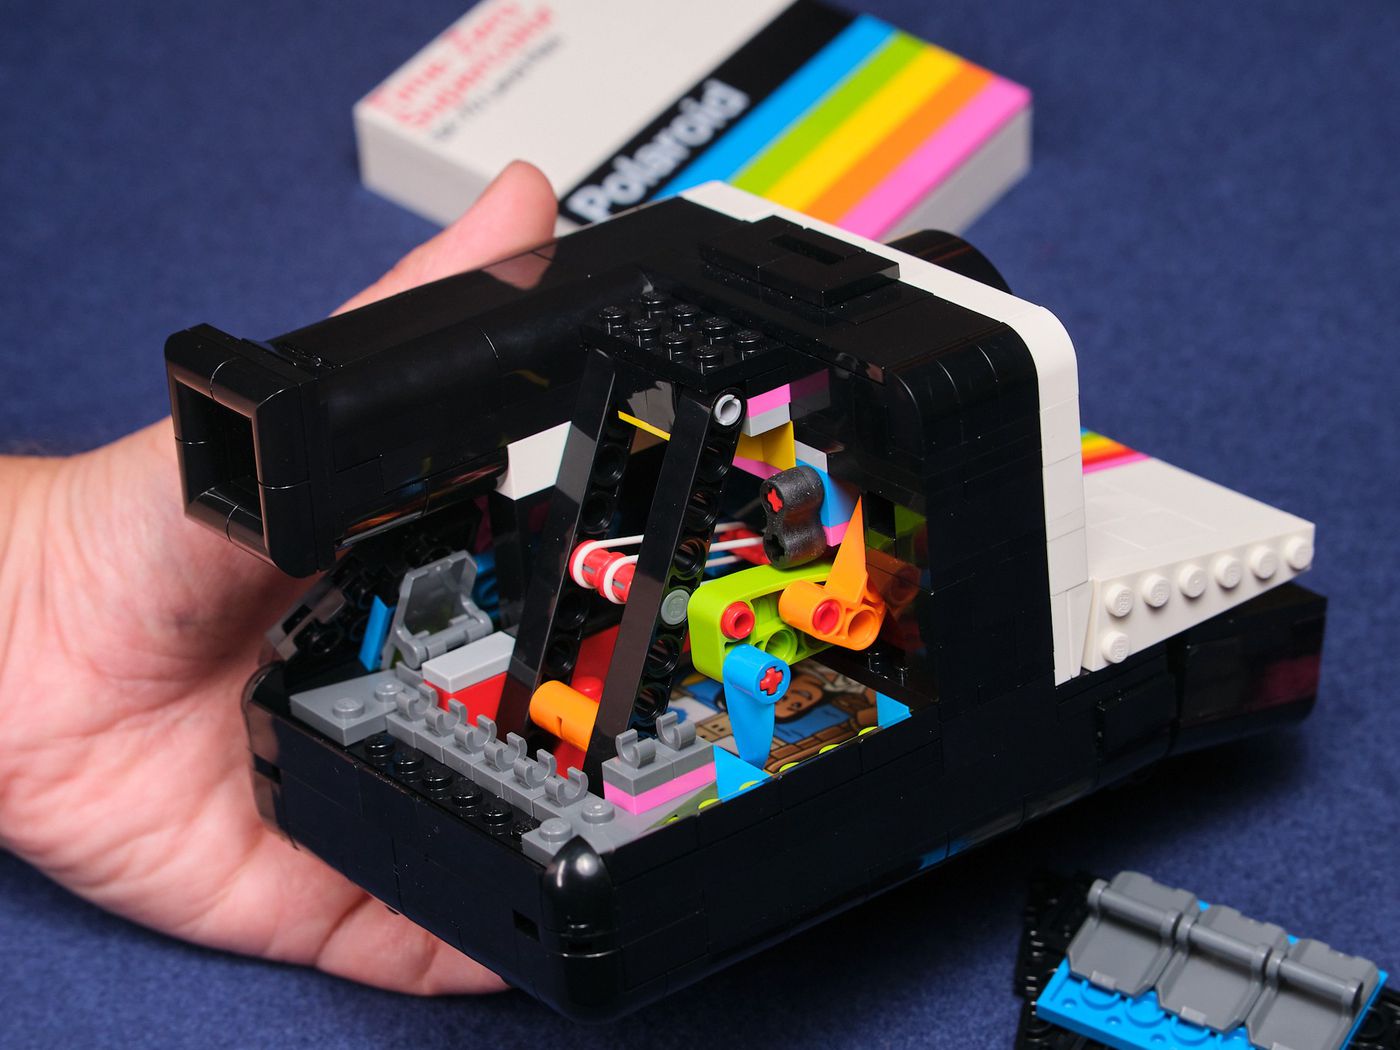 The final mechanism uses a simple orange and green linkage to raise a blue tooth, which lets the arm shoot forward. Here, you can see it encased in the Polaroid’s pyramid-like rear shell.